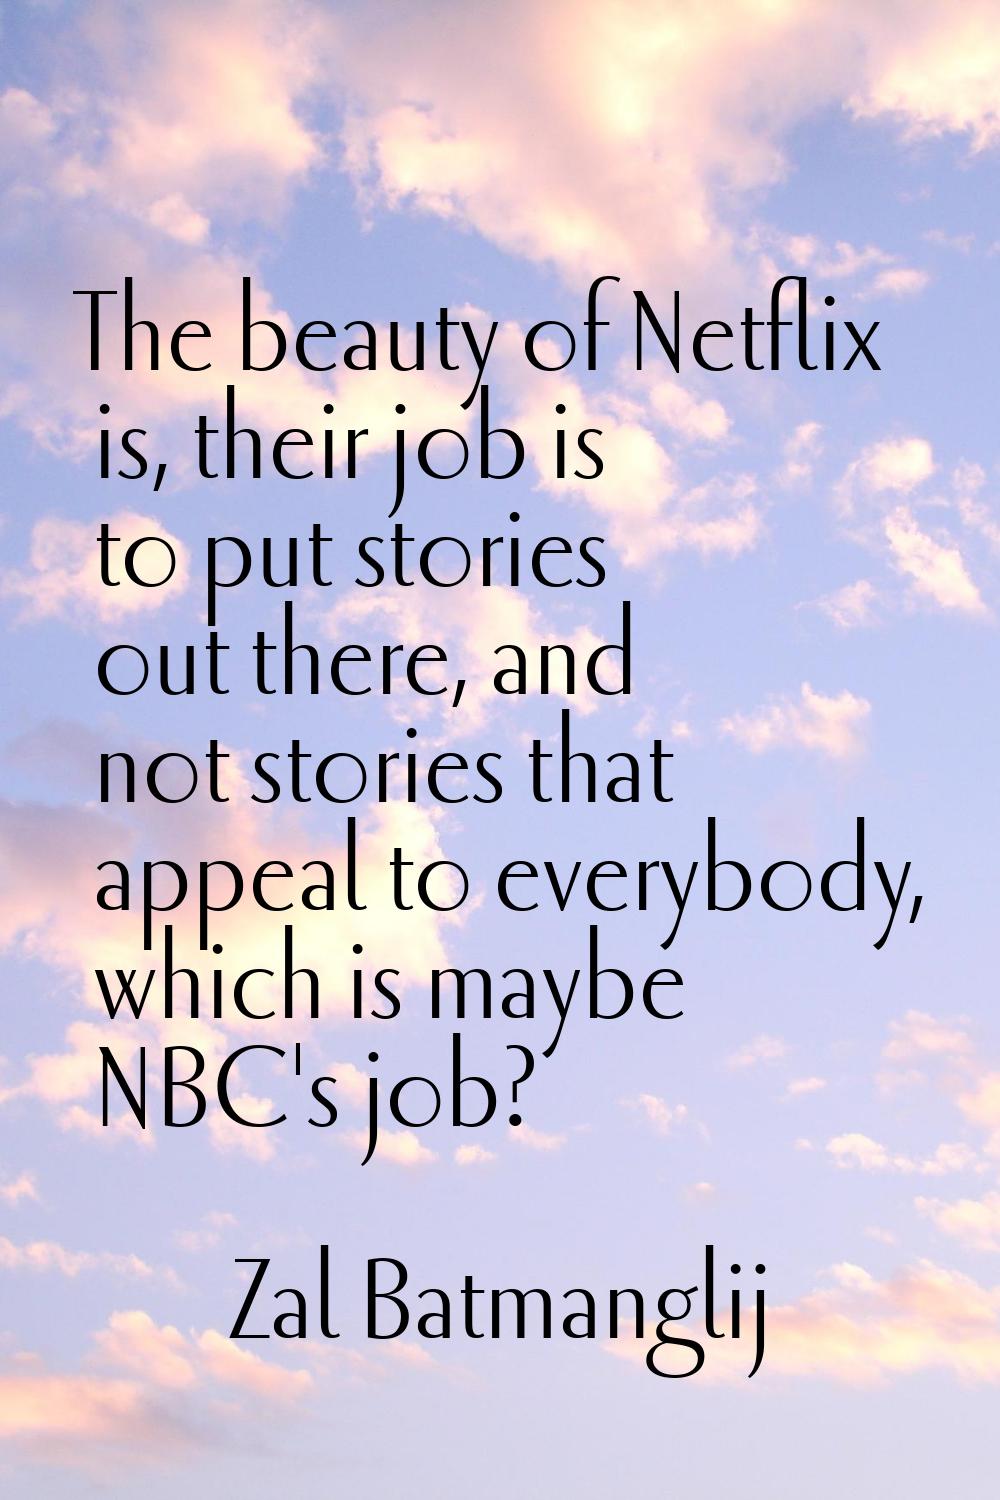 The beauty of Netflix is, their job is to put stories out there, and not stories that appeal to eve